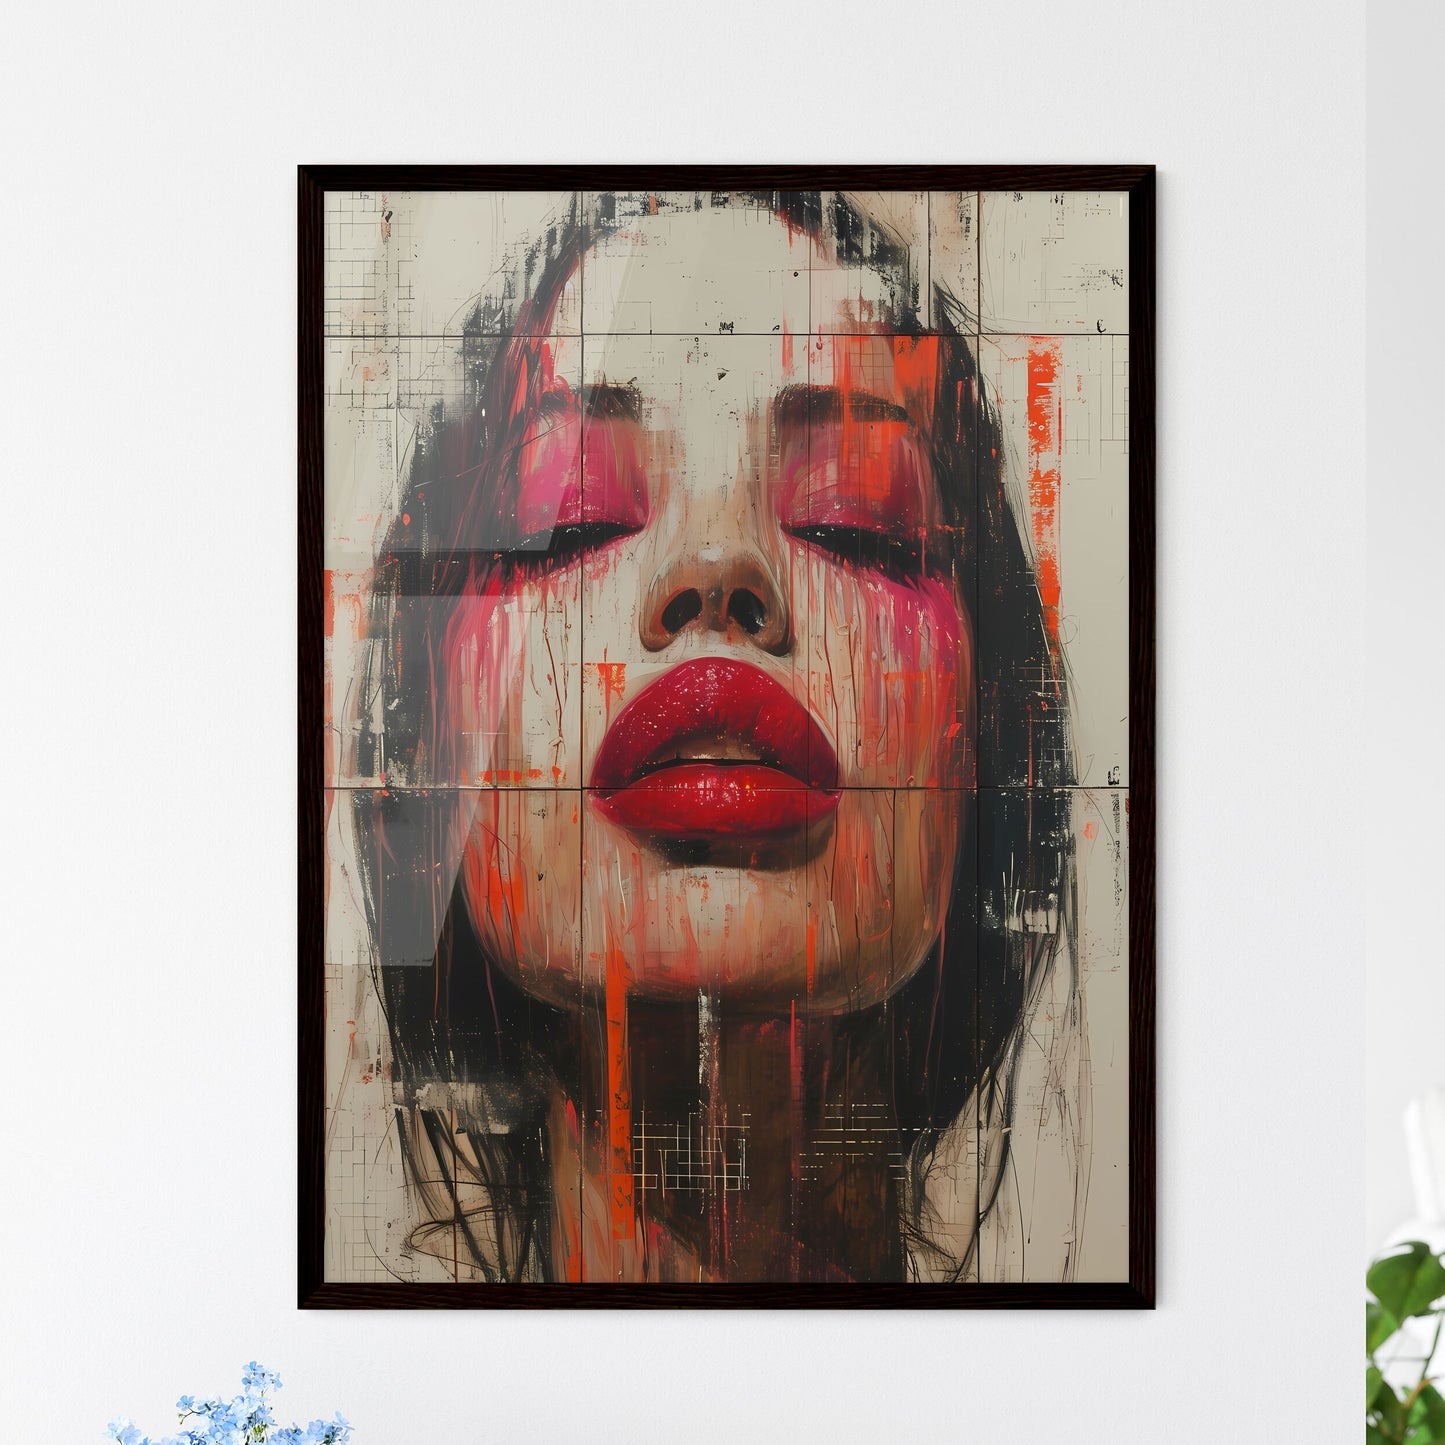 Vibrant red lips pop - Art print of a painting of a woman with red lipstick Default Title